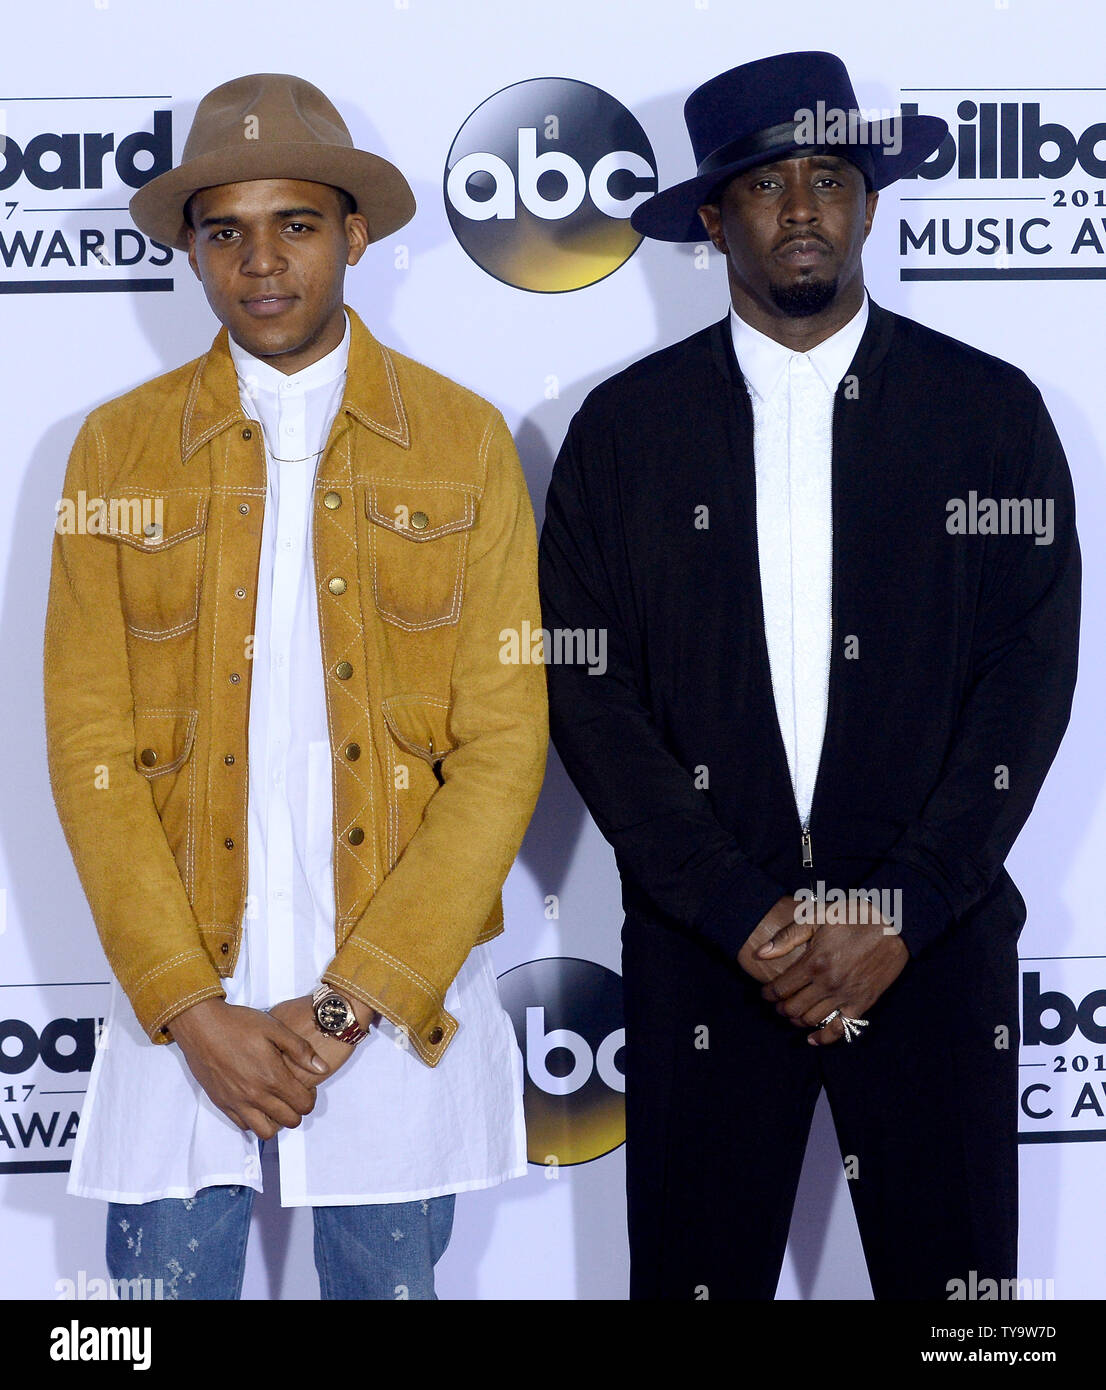 Actor Christopher Jordan Wallace (L) and producer Sean 'Diddy' Combs appear  backstage during the annual Billboard Music Awards held at T-Mobile Arena  in Las Vegas, Nevada on May 21, 2017. This year's